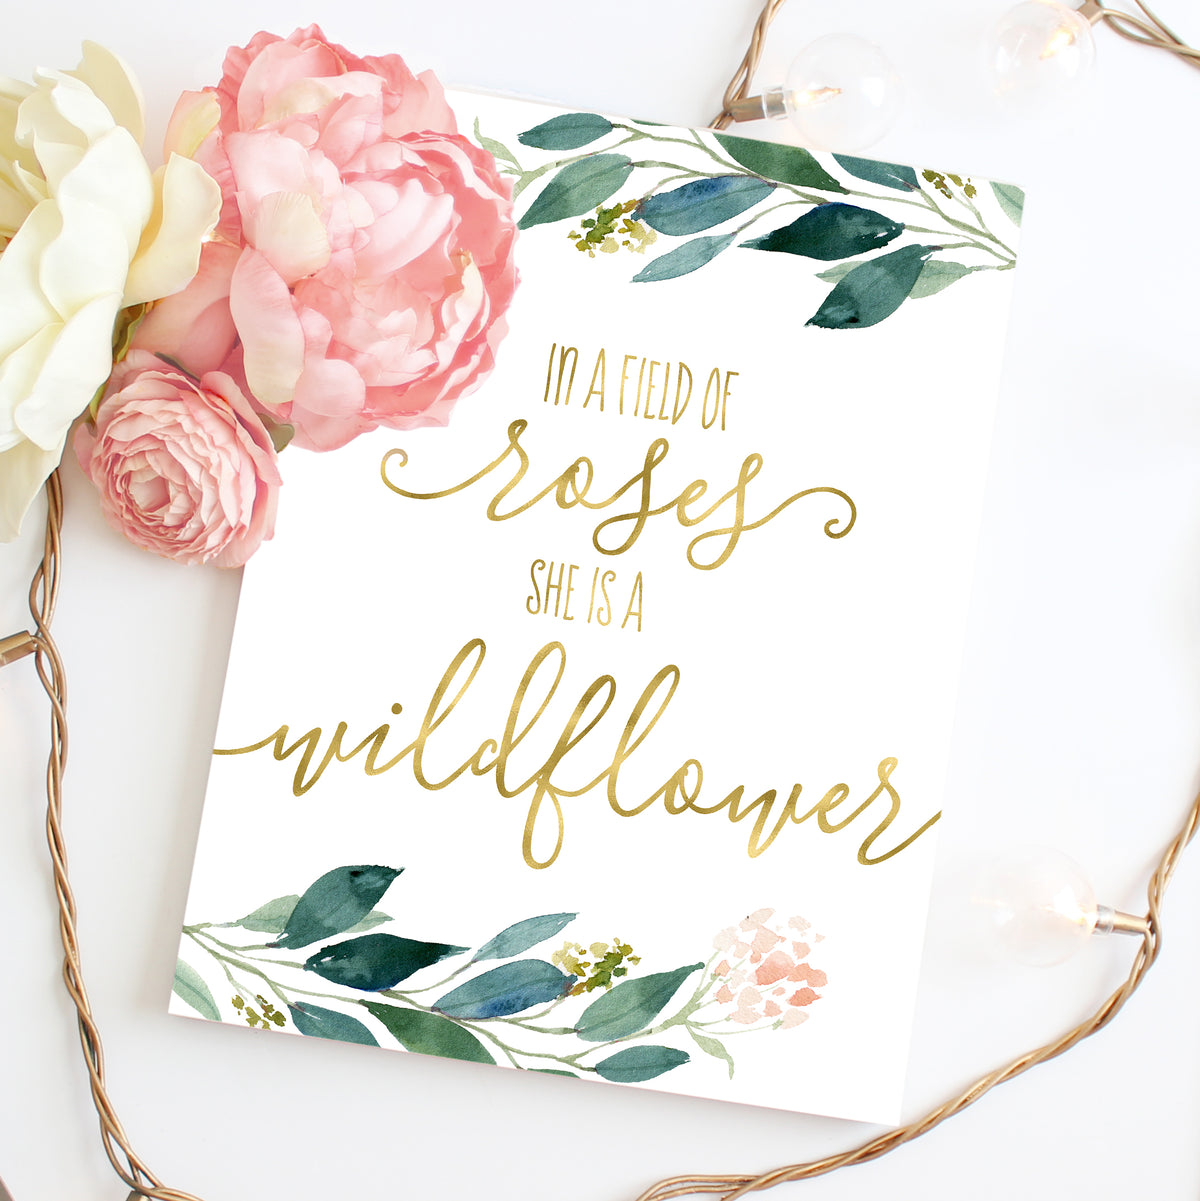 In a field of roses she is a wildflower - Nursery Wall Art Printable